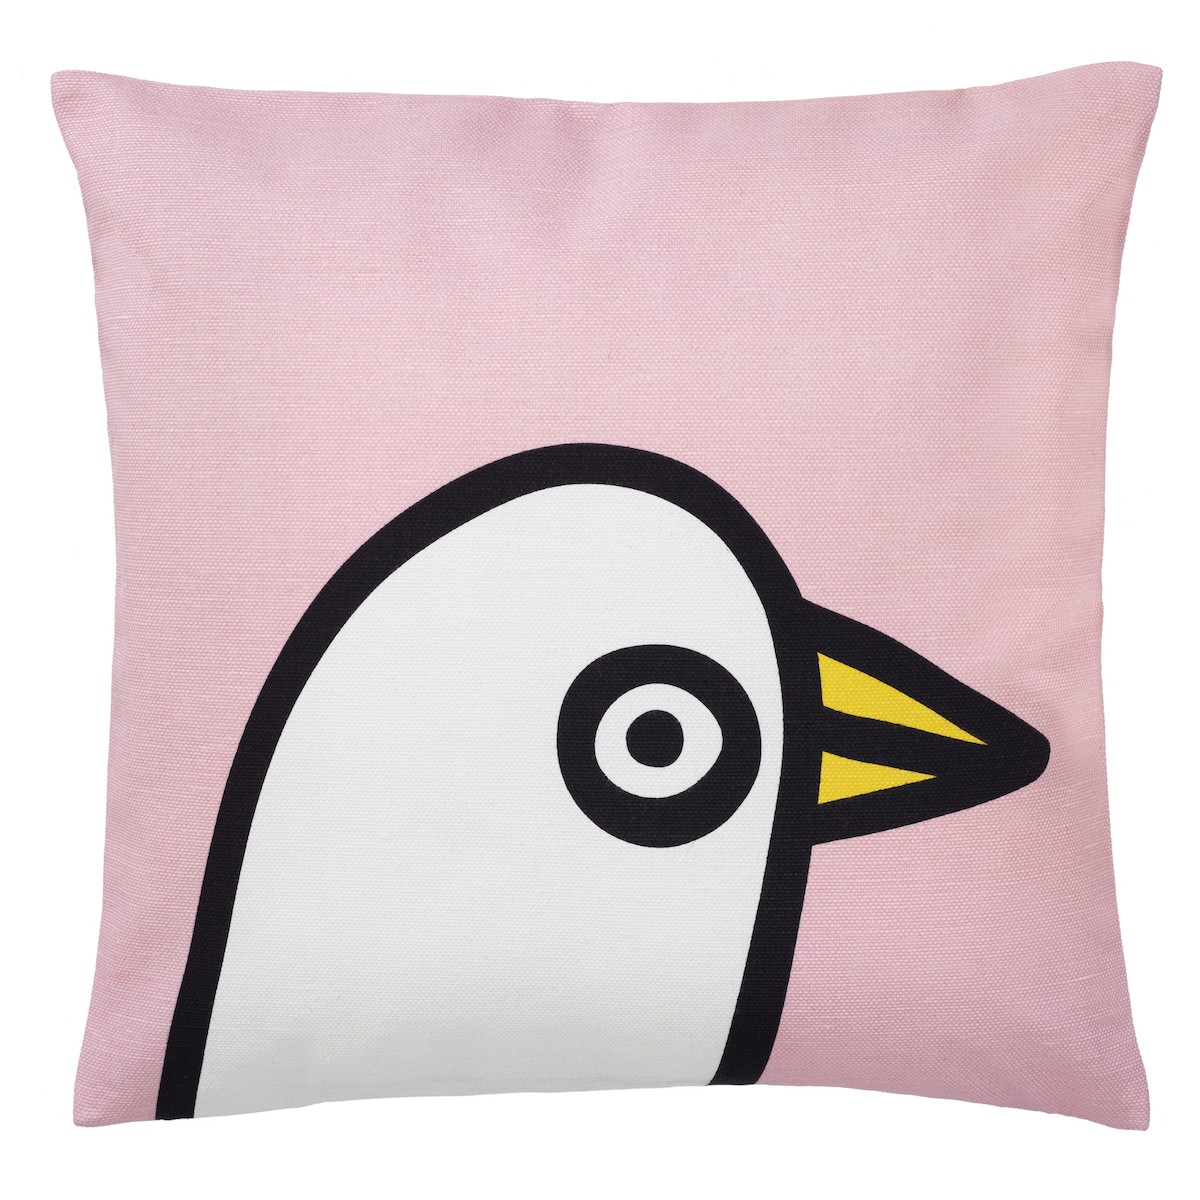 OUT OF STOCK - 47x47cm - Birdie Pink cushion cover OTC